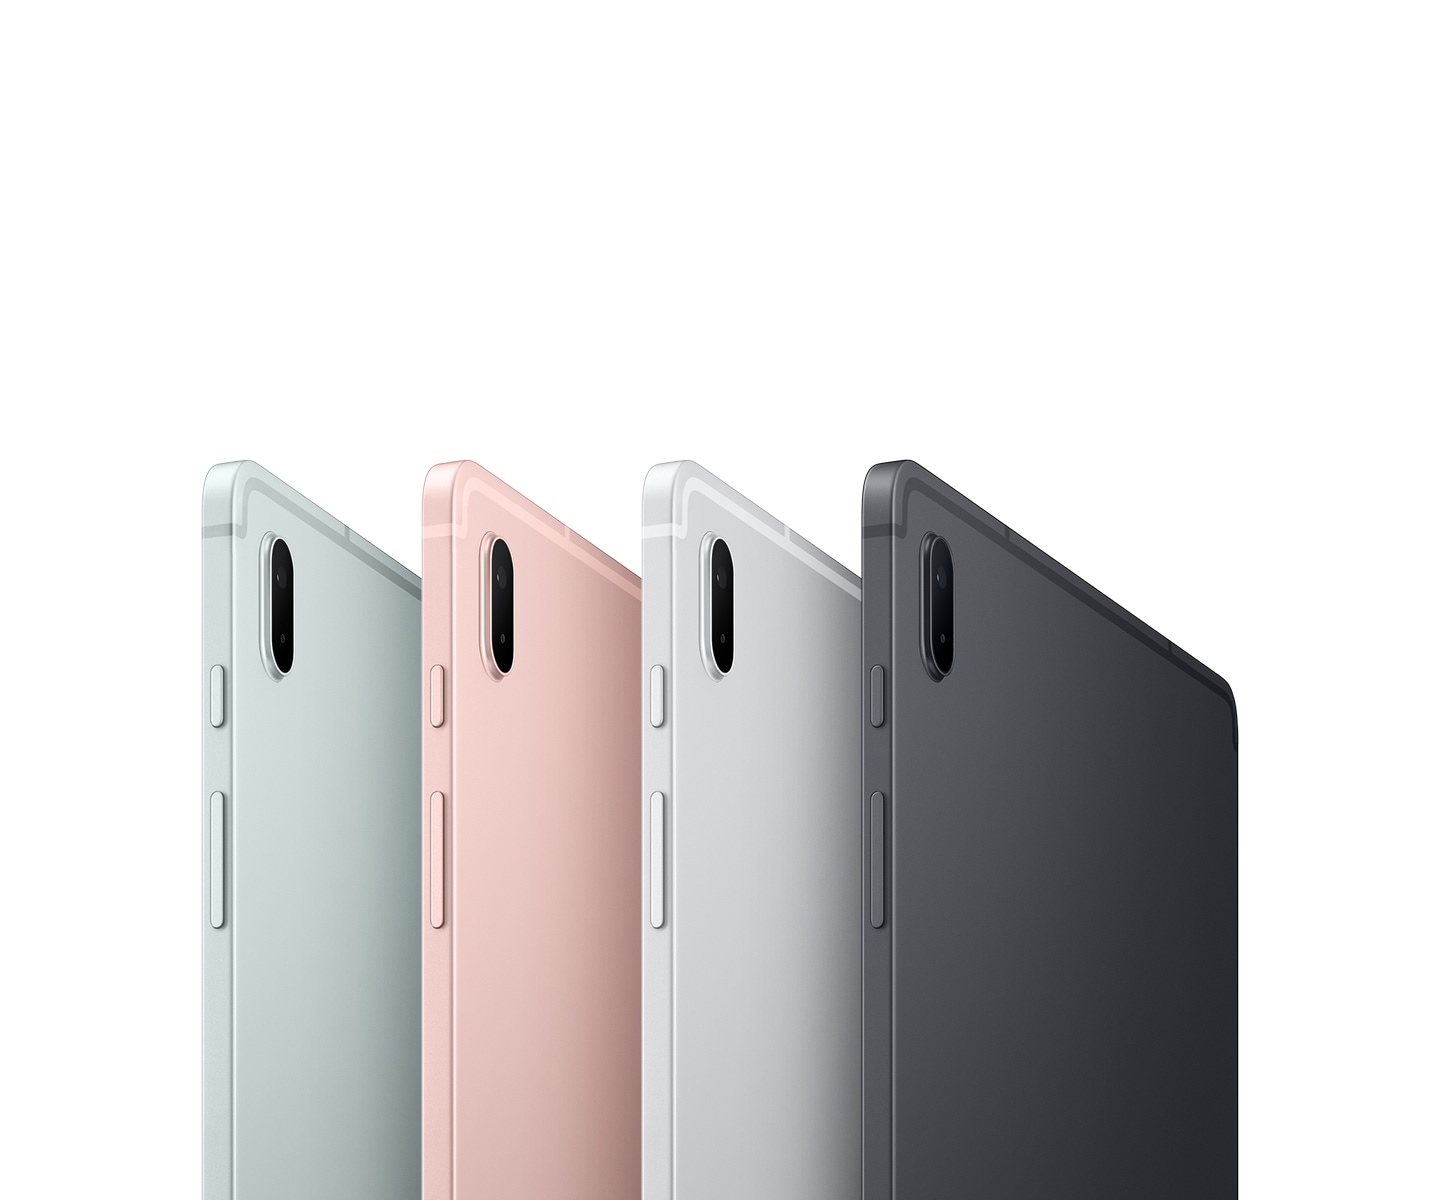 Four Galaxy Tab S7 FE tablets, all seen from the rear at an angle to show the colors: Mystic Green, Mystic Pink, Mystic Silver and Mystic Black.